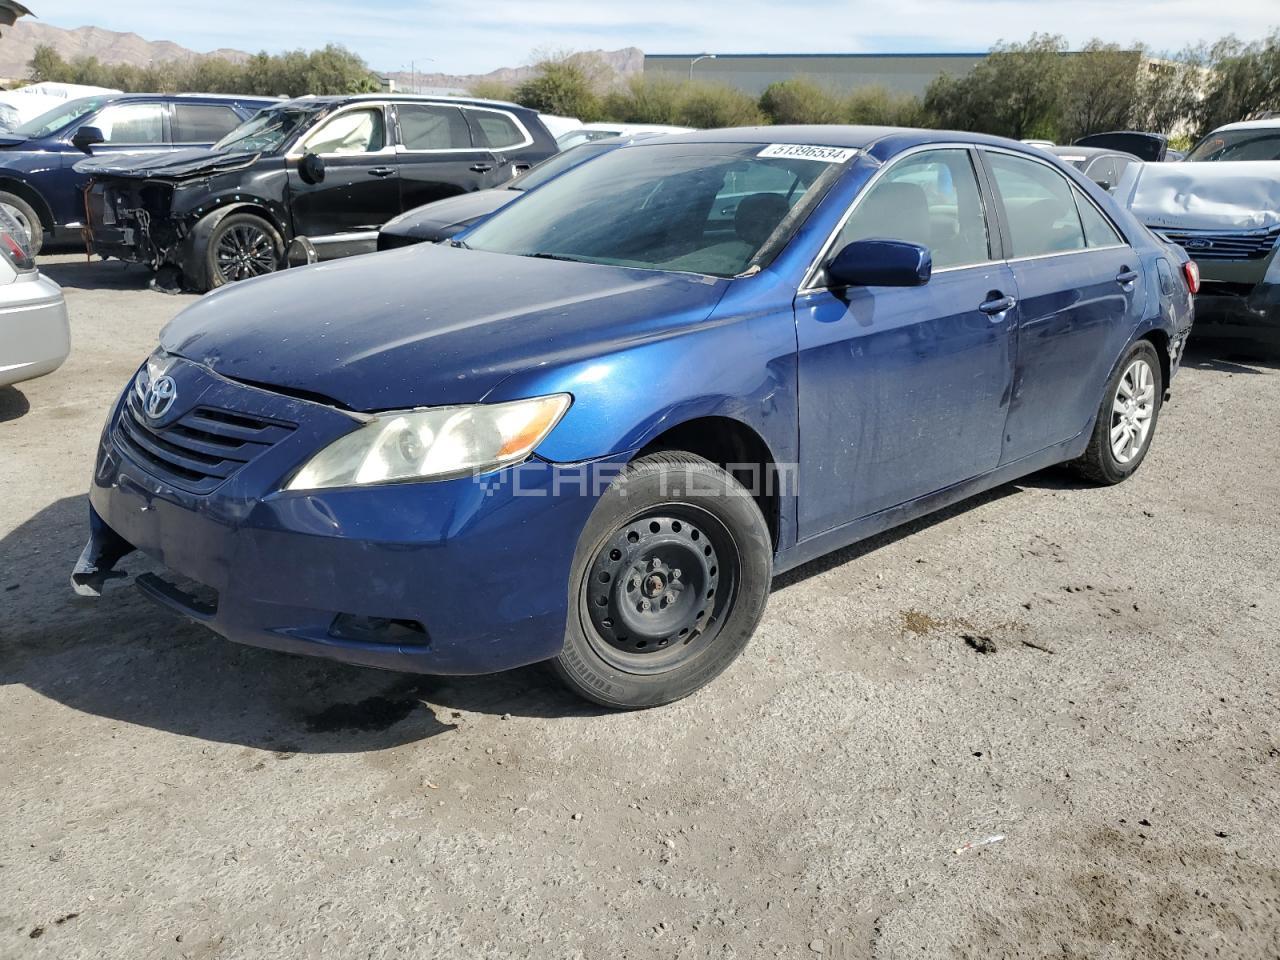 VIN: 4T4BE46K78R029933 - toyota camry